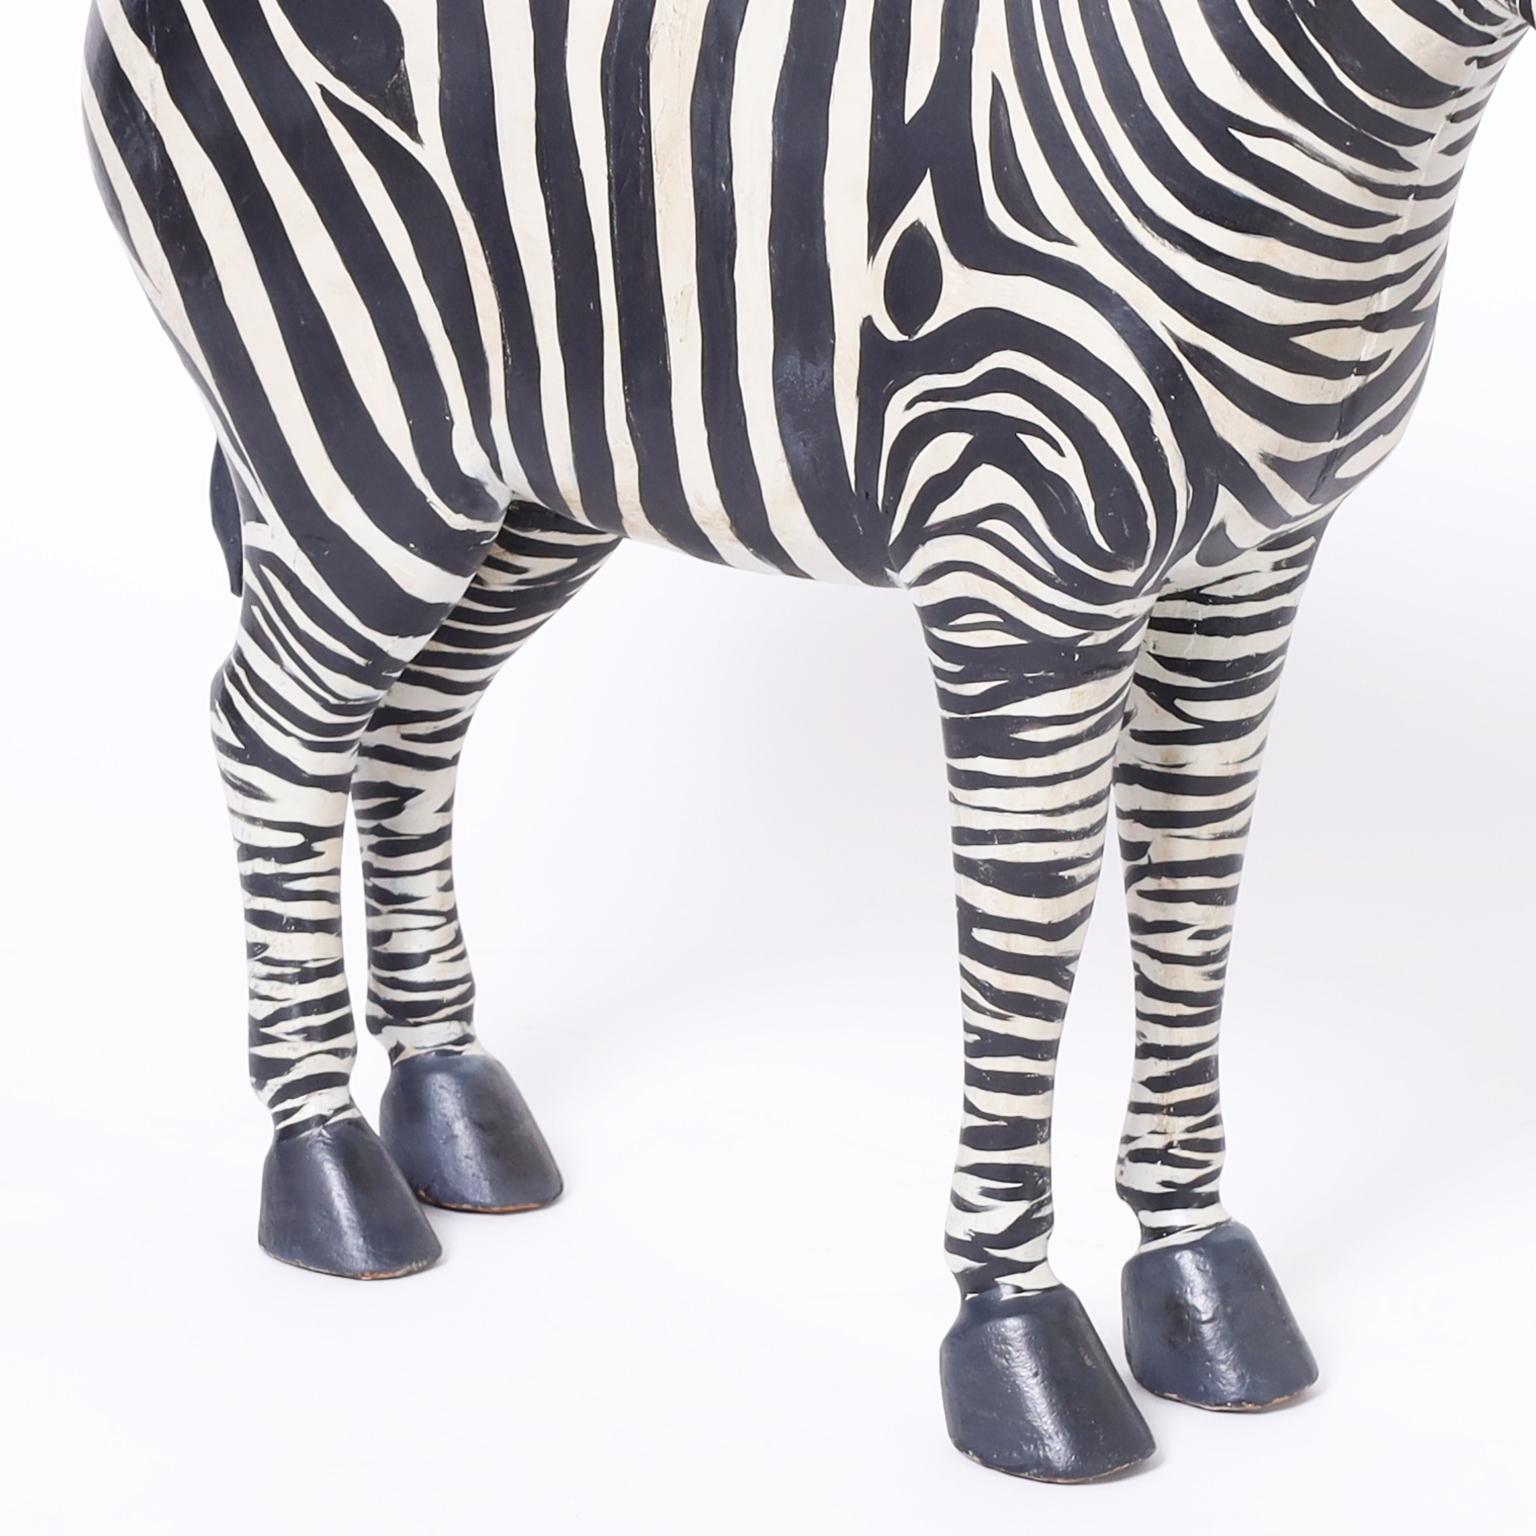 Hardwood Pair of Carved and Painted Zebra Figures